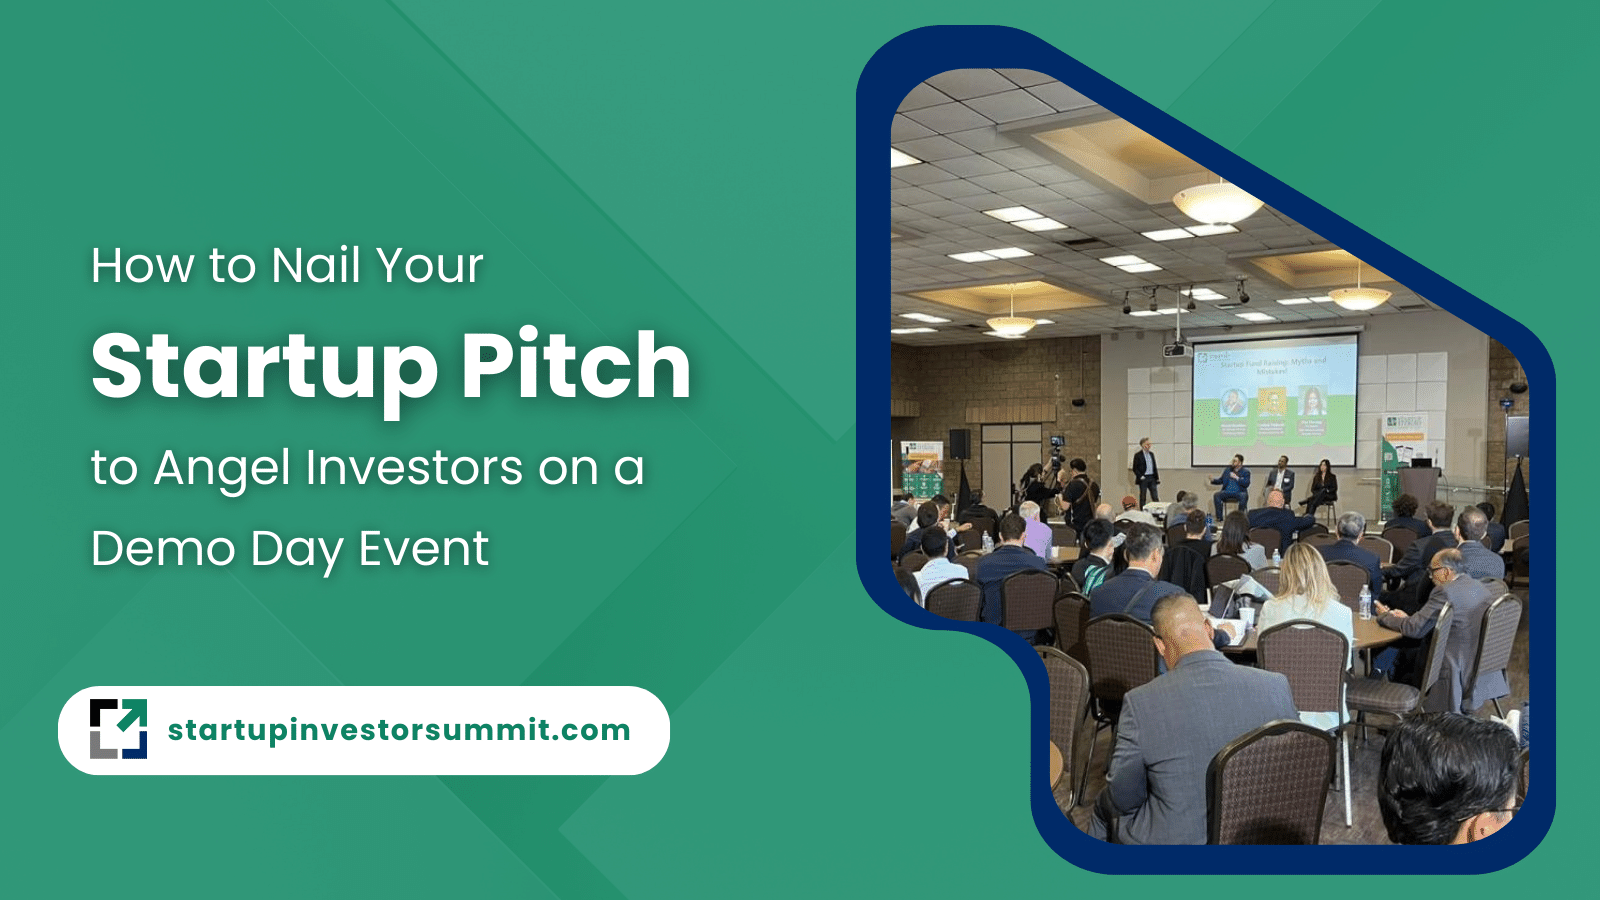 How to Nail Your Startup Pitch to Angel Investors on a Demo Day Event